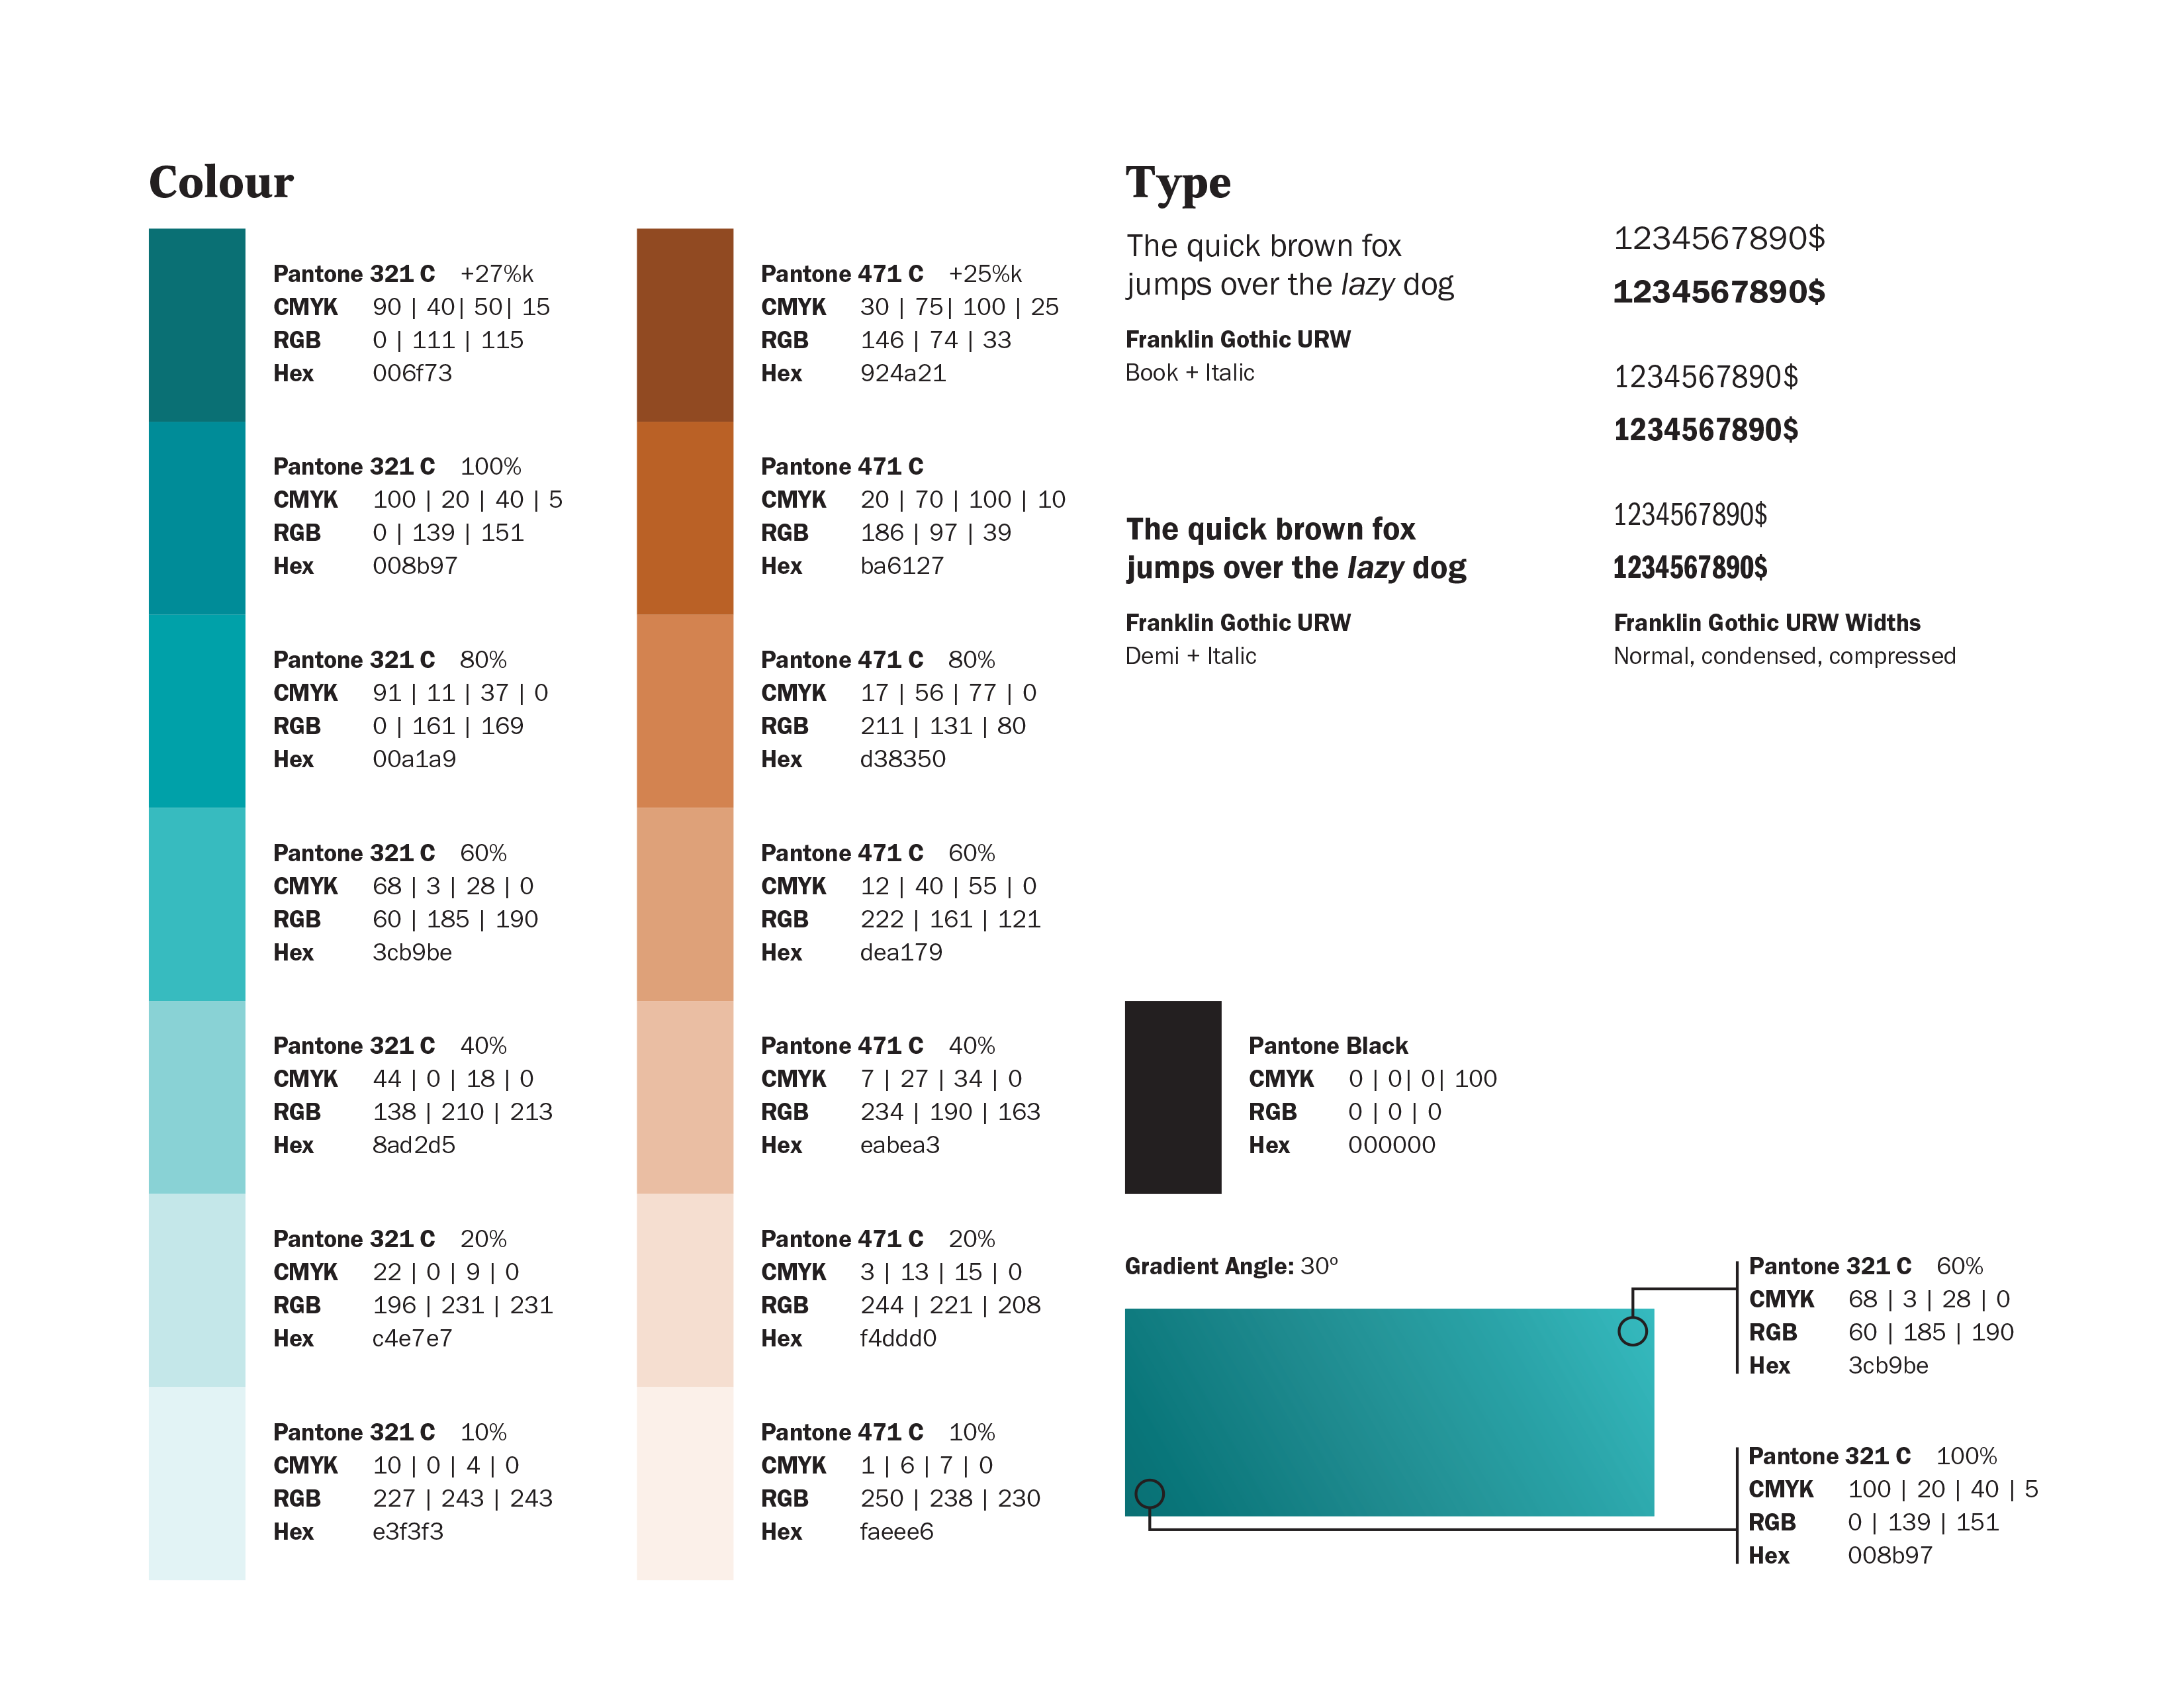 The quick reference guide for the Survey of Finance Companies' visual identity.